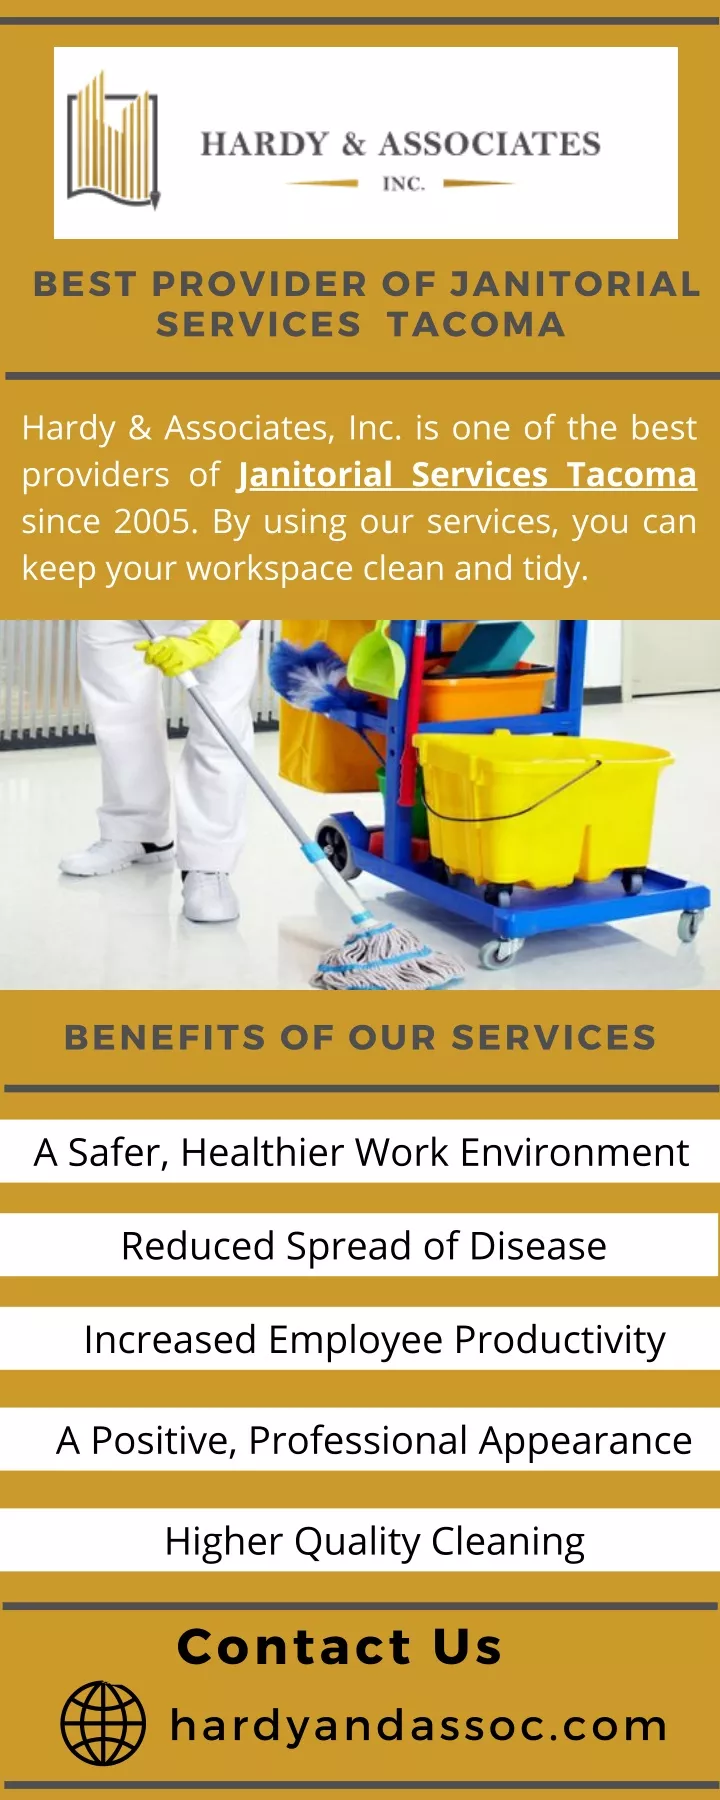 best provider of janitorial services tacoma